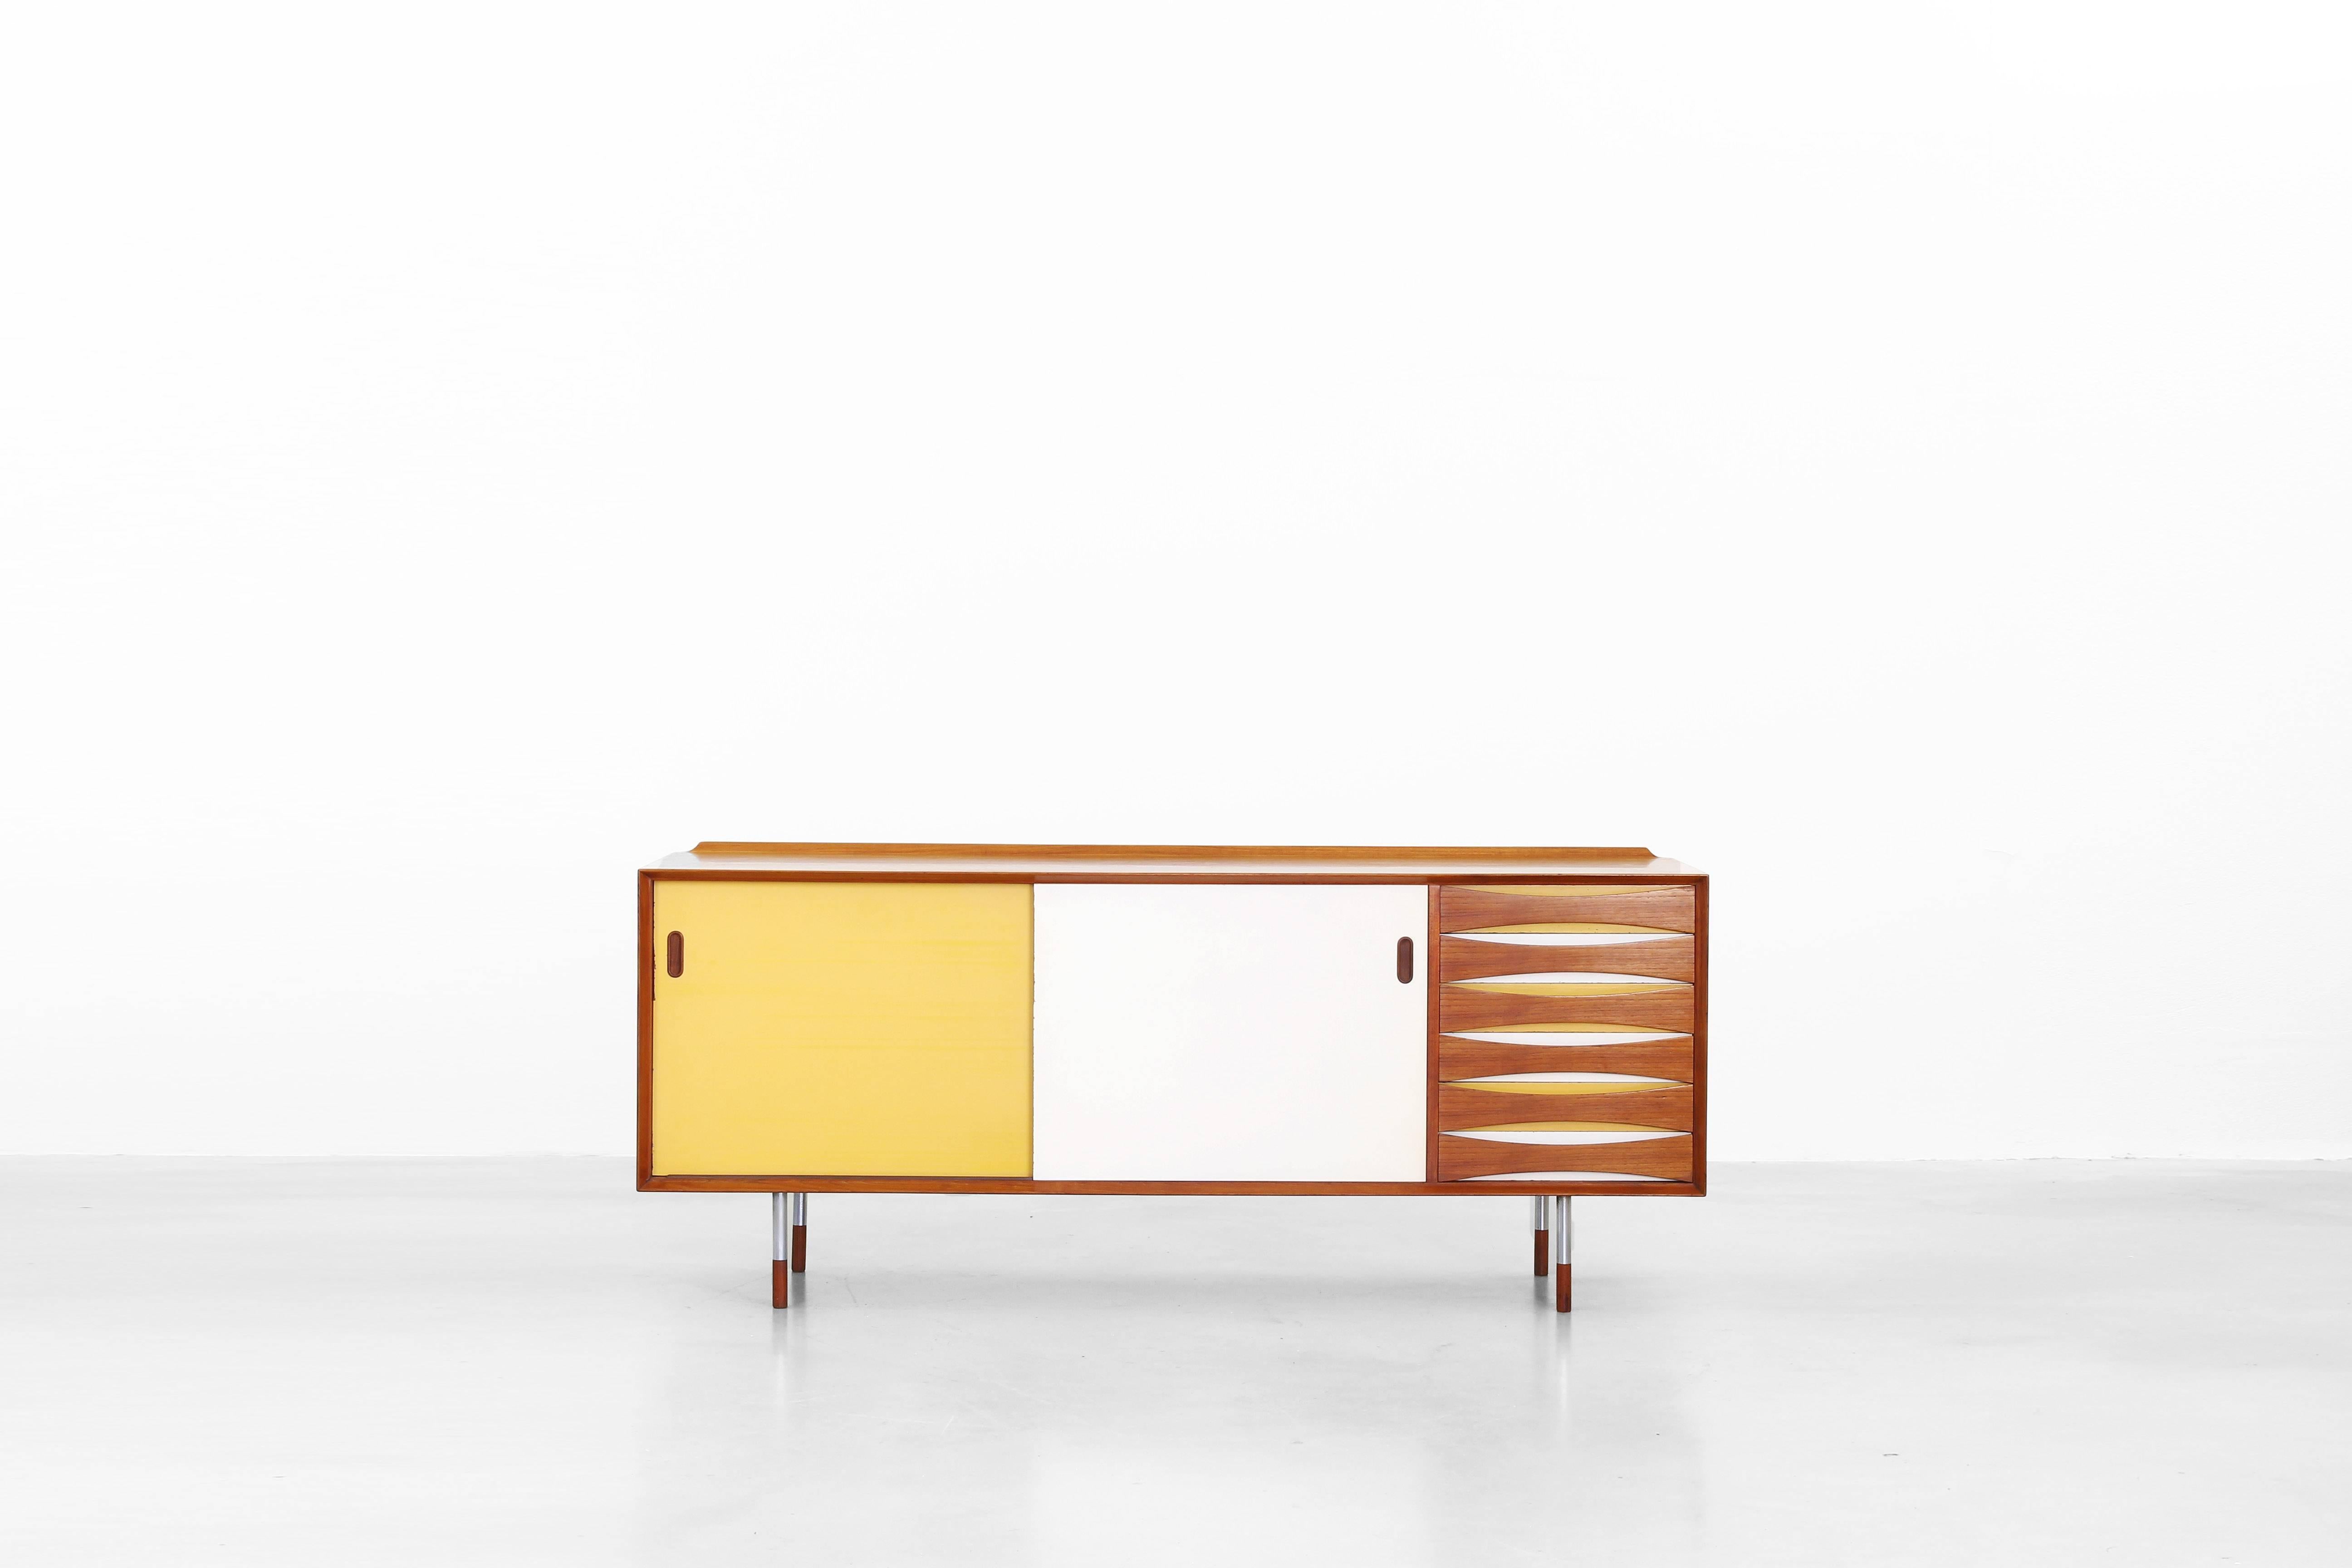 Very beautiful sideboard mod. 29 designed by Arne Vodder for Sibast Furniture, Denmark in 1958. Very beautifully made with turn able doors and yellow white lacquer on the drawers. This sideboard is made of teak and is still in a very good original